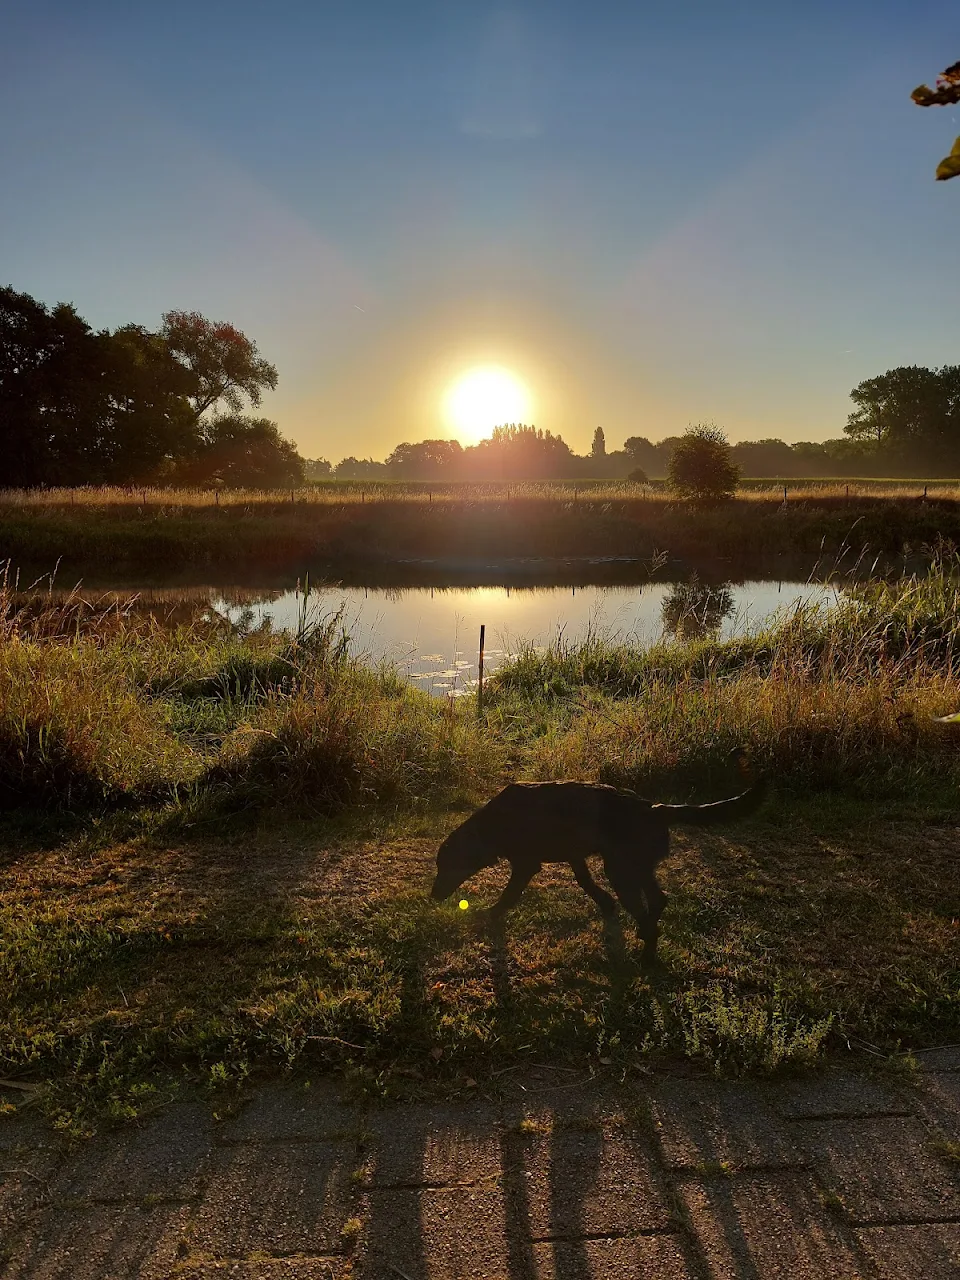 A sunrise with my dog in the Netherlands.